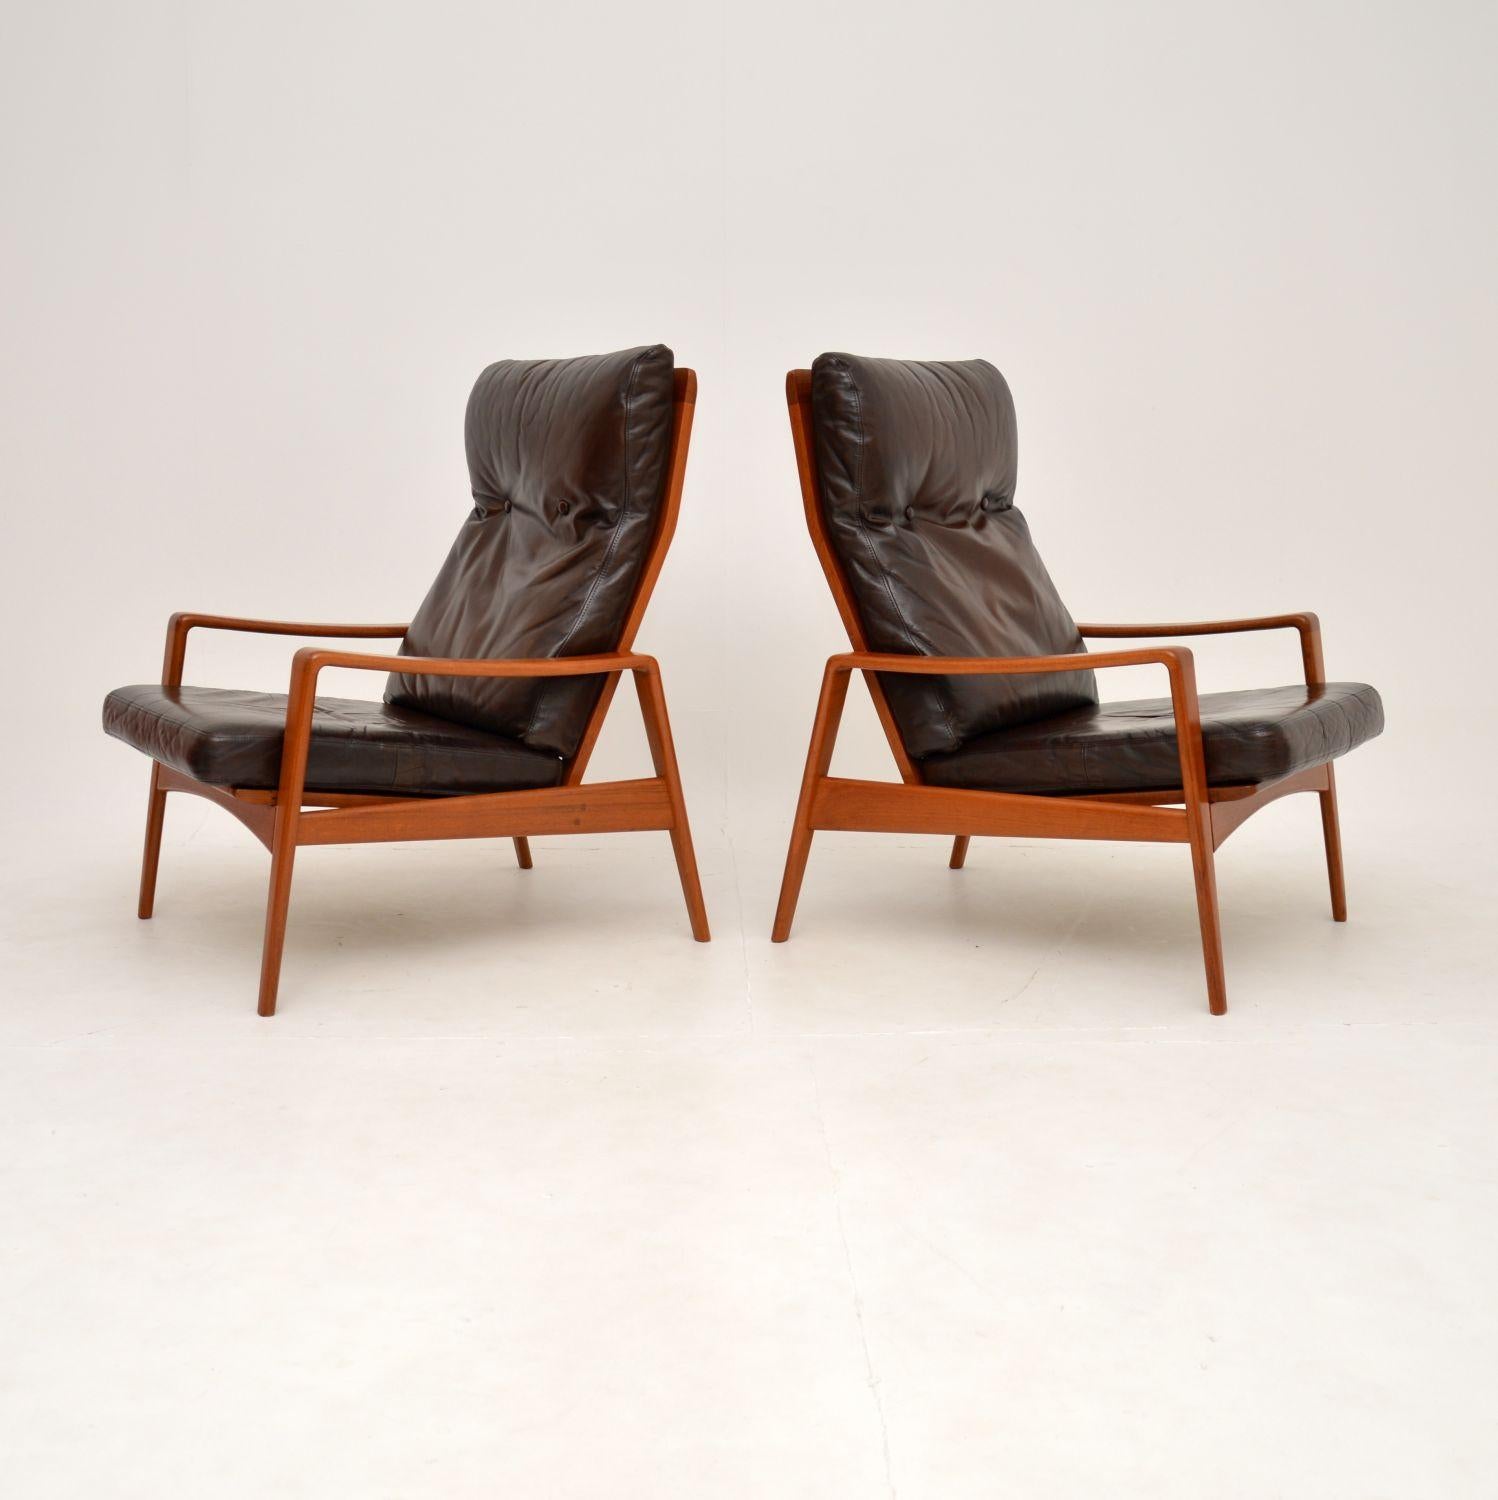 Mid-Century Modern Pair of Danish Vintage Teak and Leather Armchairs by Arne Wahl Iversen For Sale